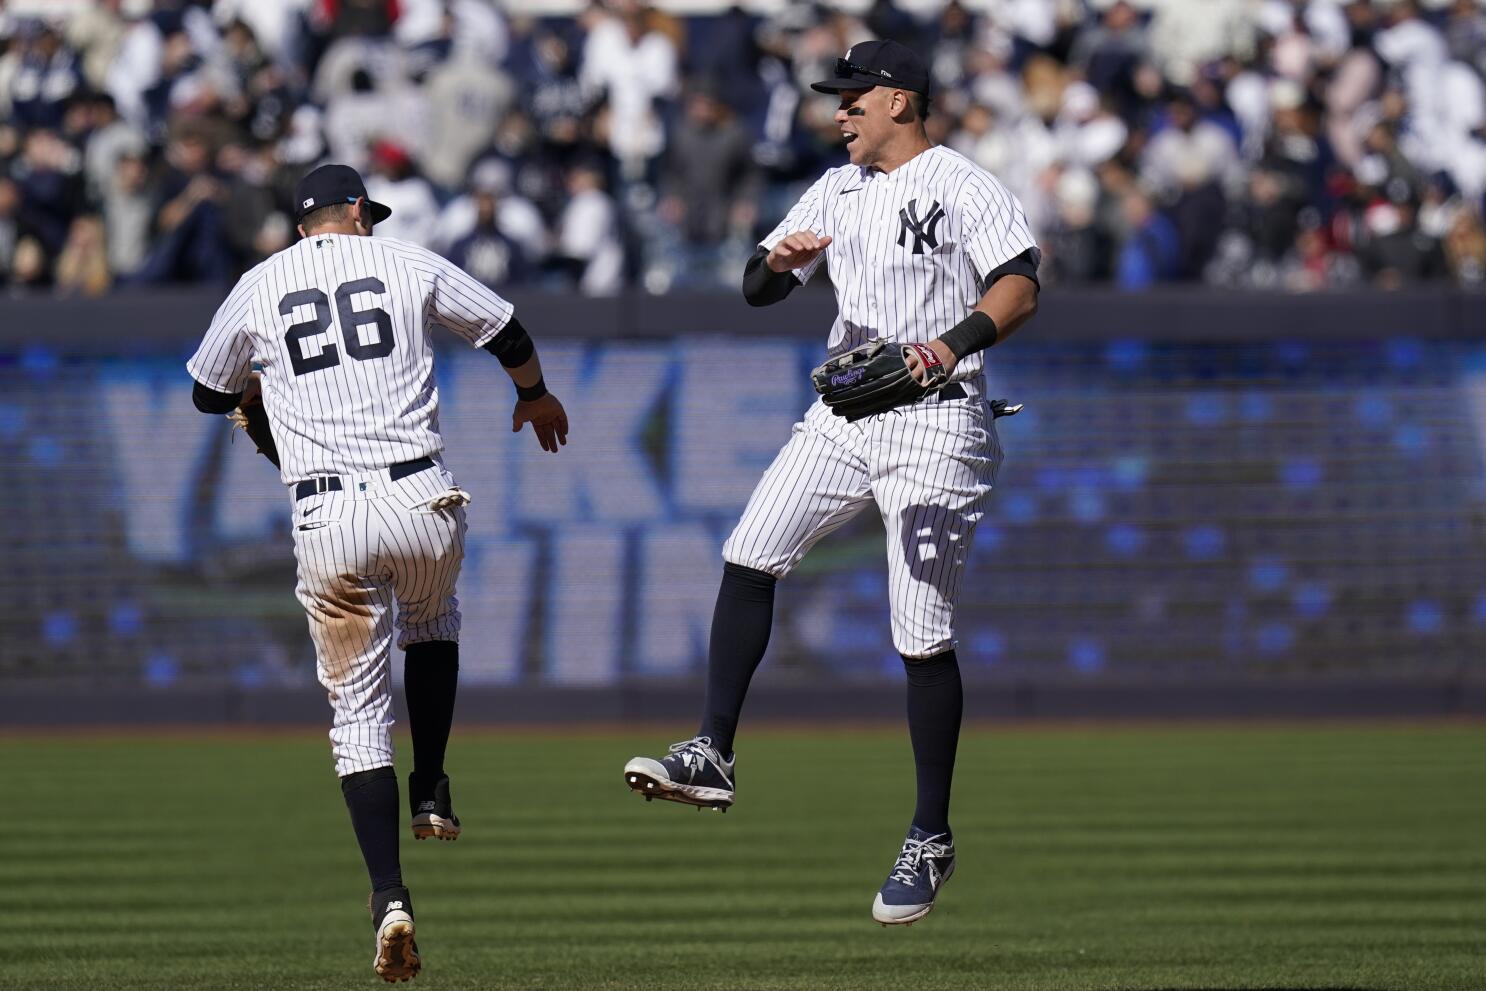 Judge homers, Cole dominates as Yankees beat Giants 5-0 - The San